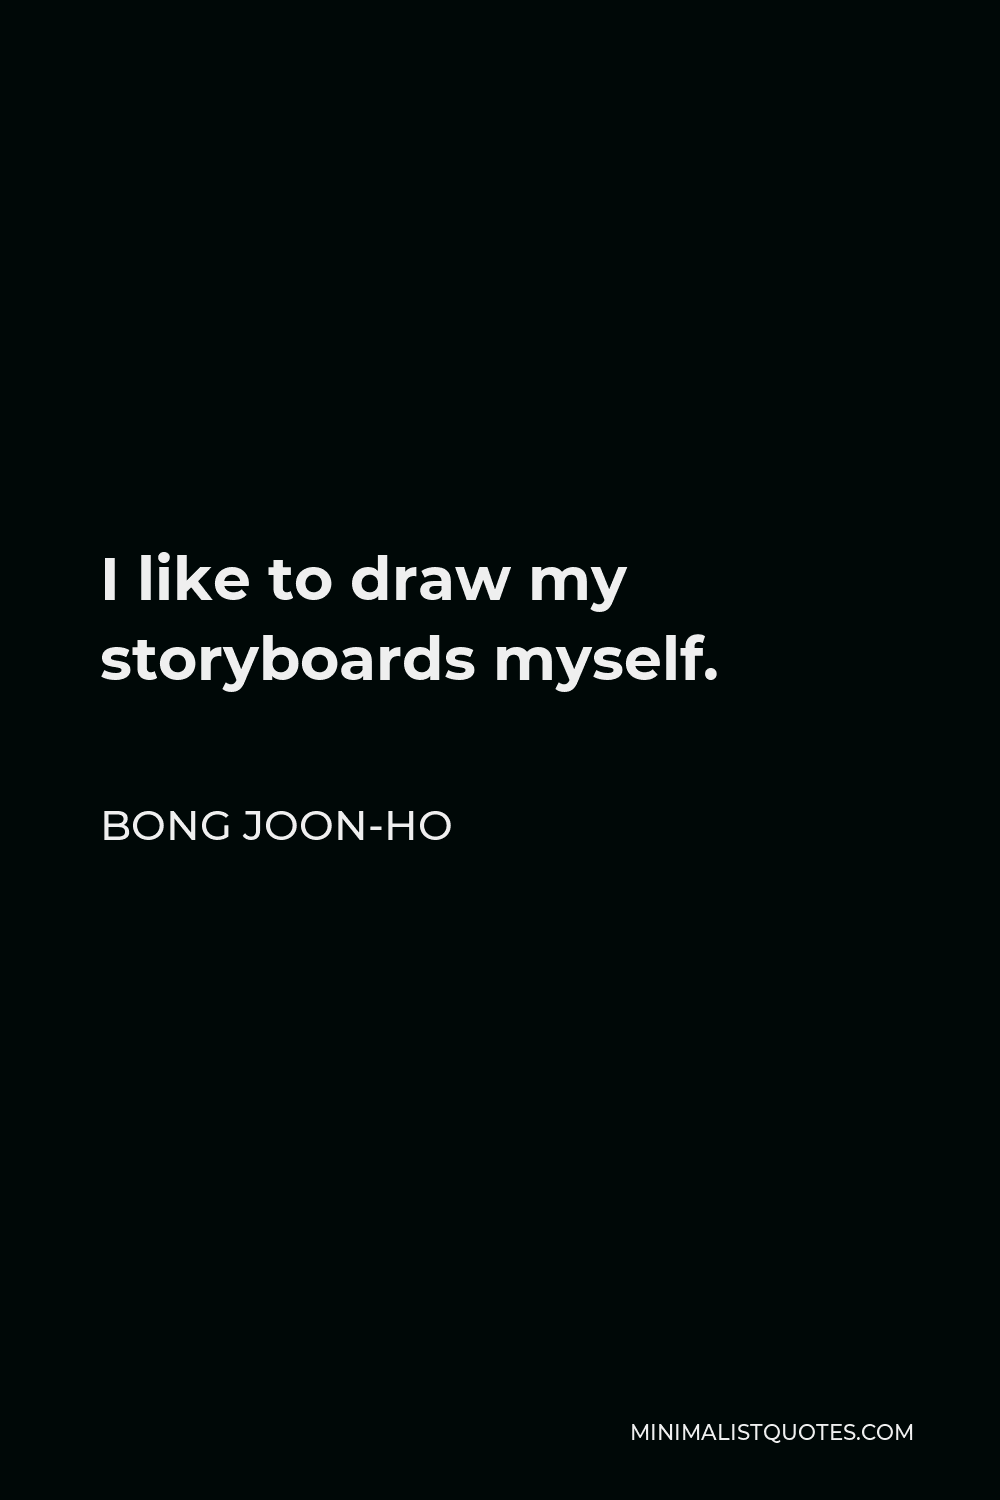 Bong Joon-ho Quote - I like to draw my storyboards myself.